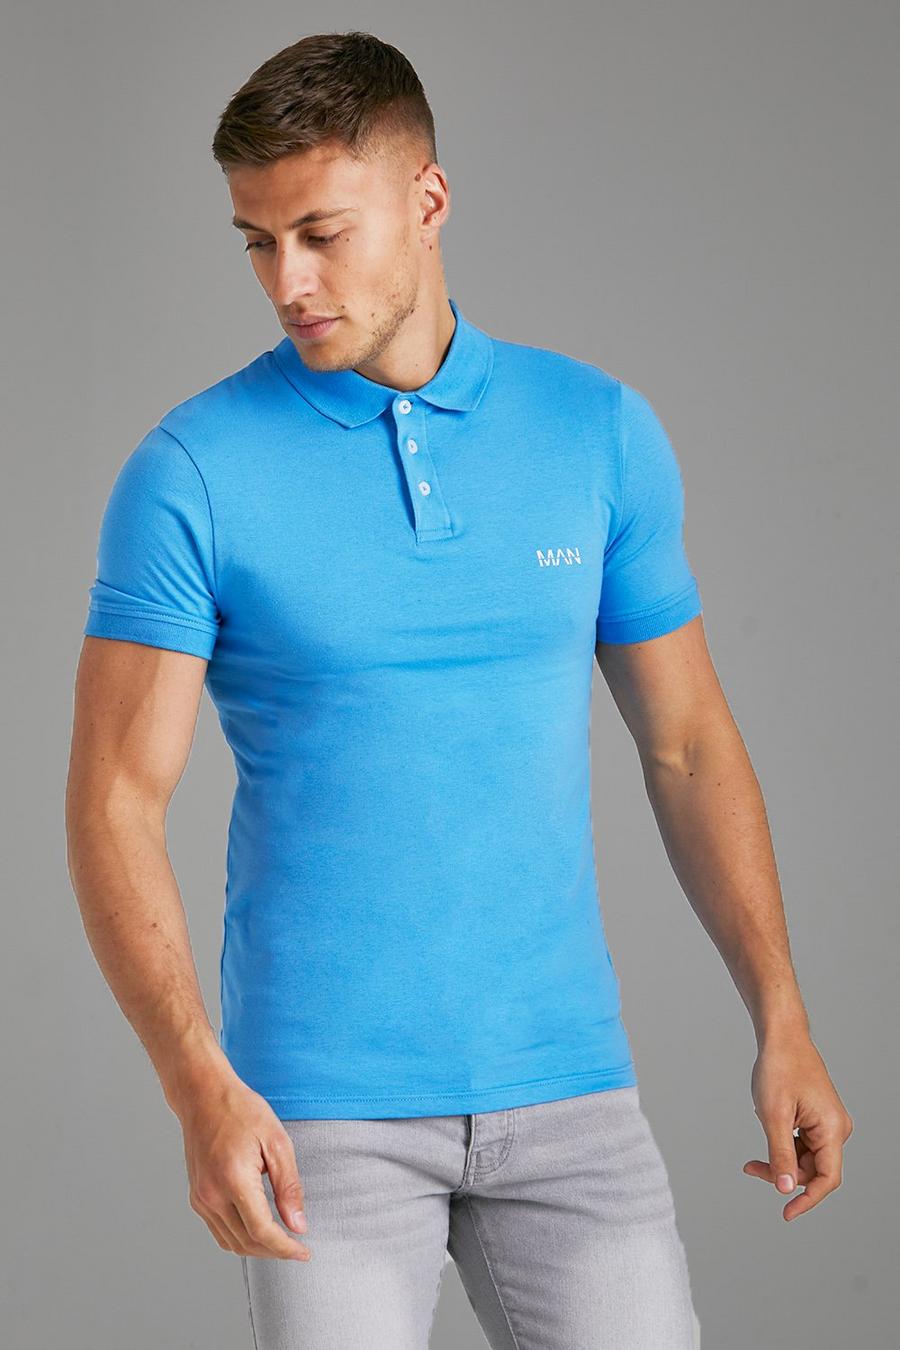 Blue Muscle Fit Man Short Sleeve Polo